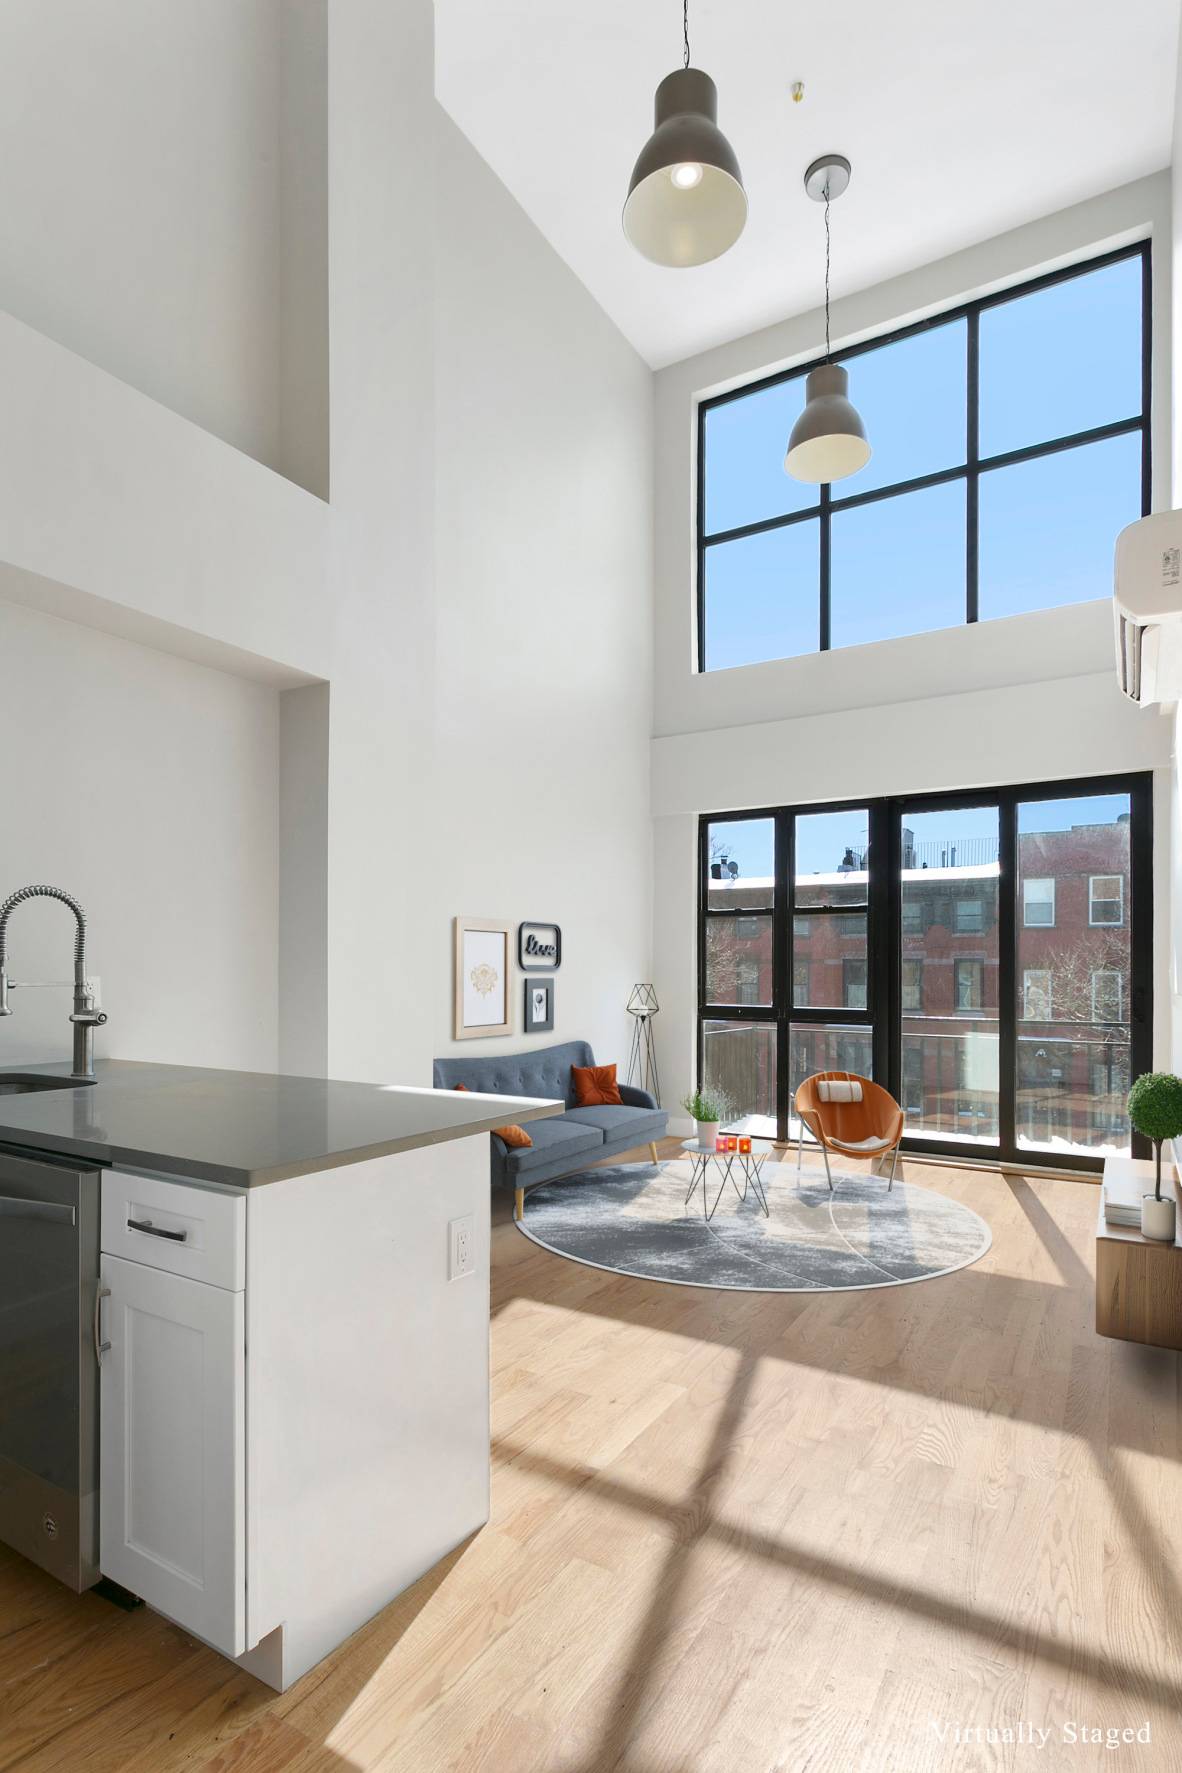 Your first steps into this Brooklyn Bedford Stuyvesant duplex apartment fill your world with light, double height ceilings and two tiers of large windows naturally brighten the spacious kitchen and ...